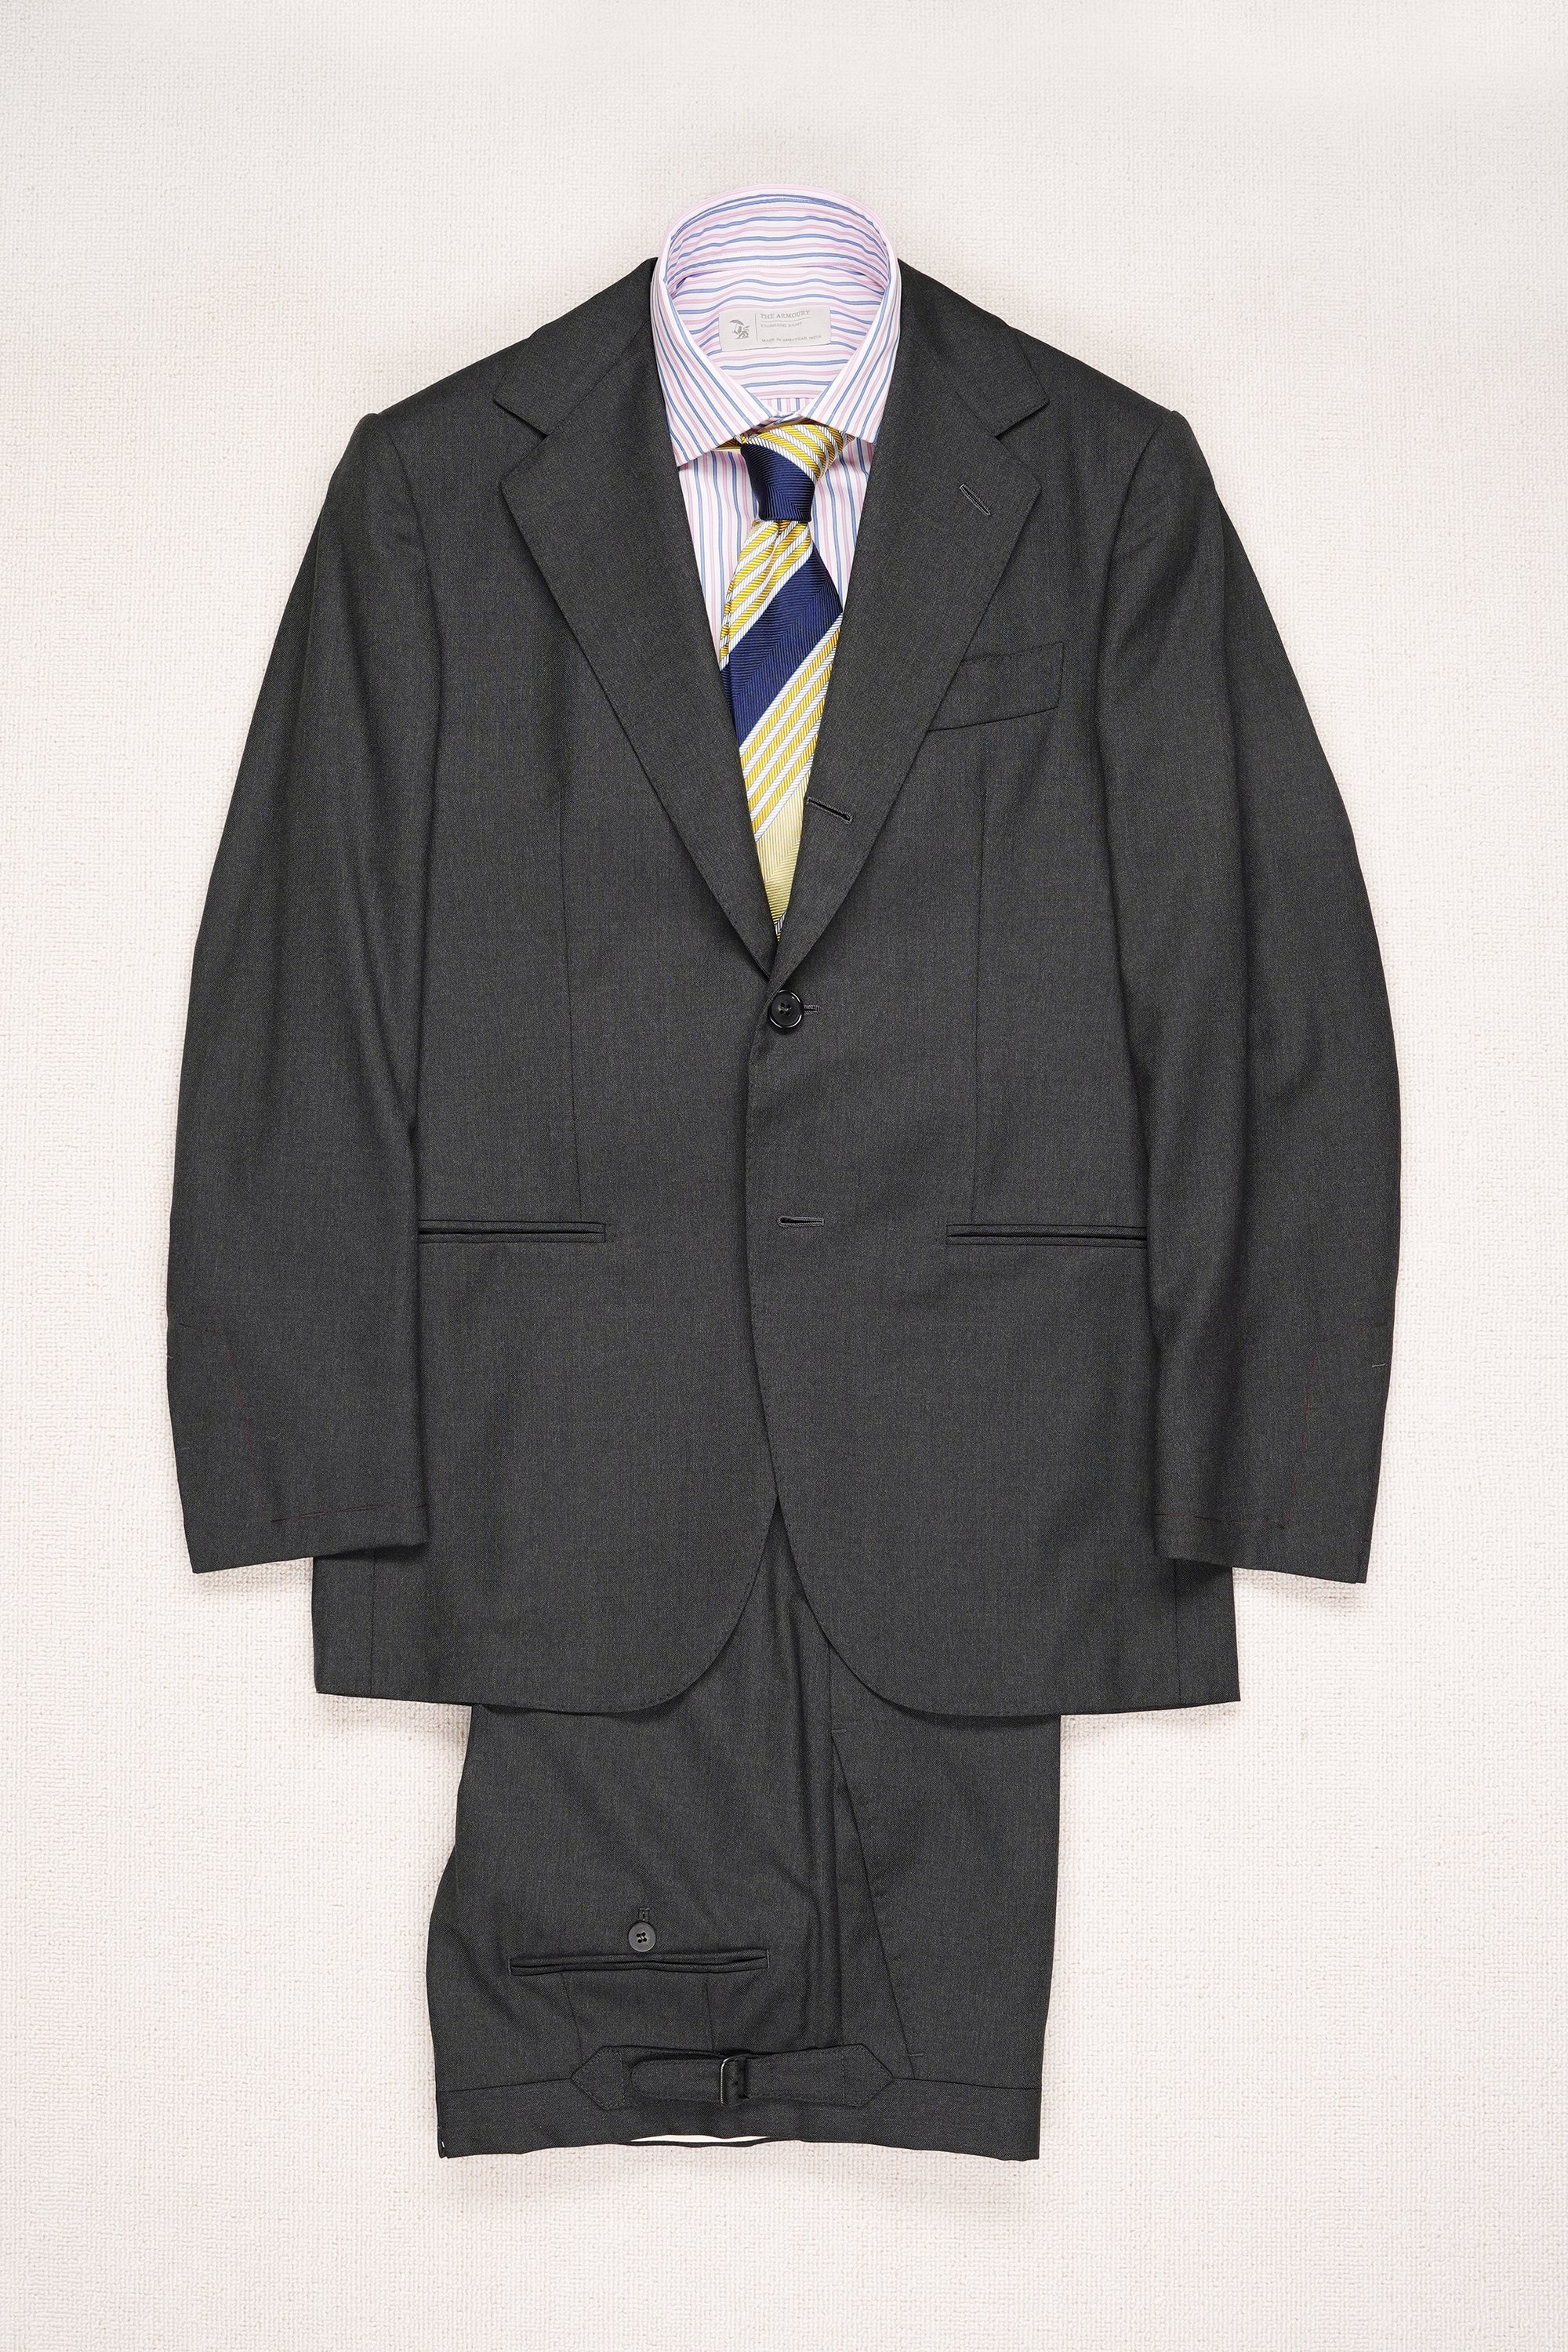 The Armoury Model 101 Grey Super 110 Wool Suit